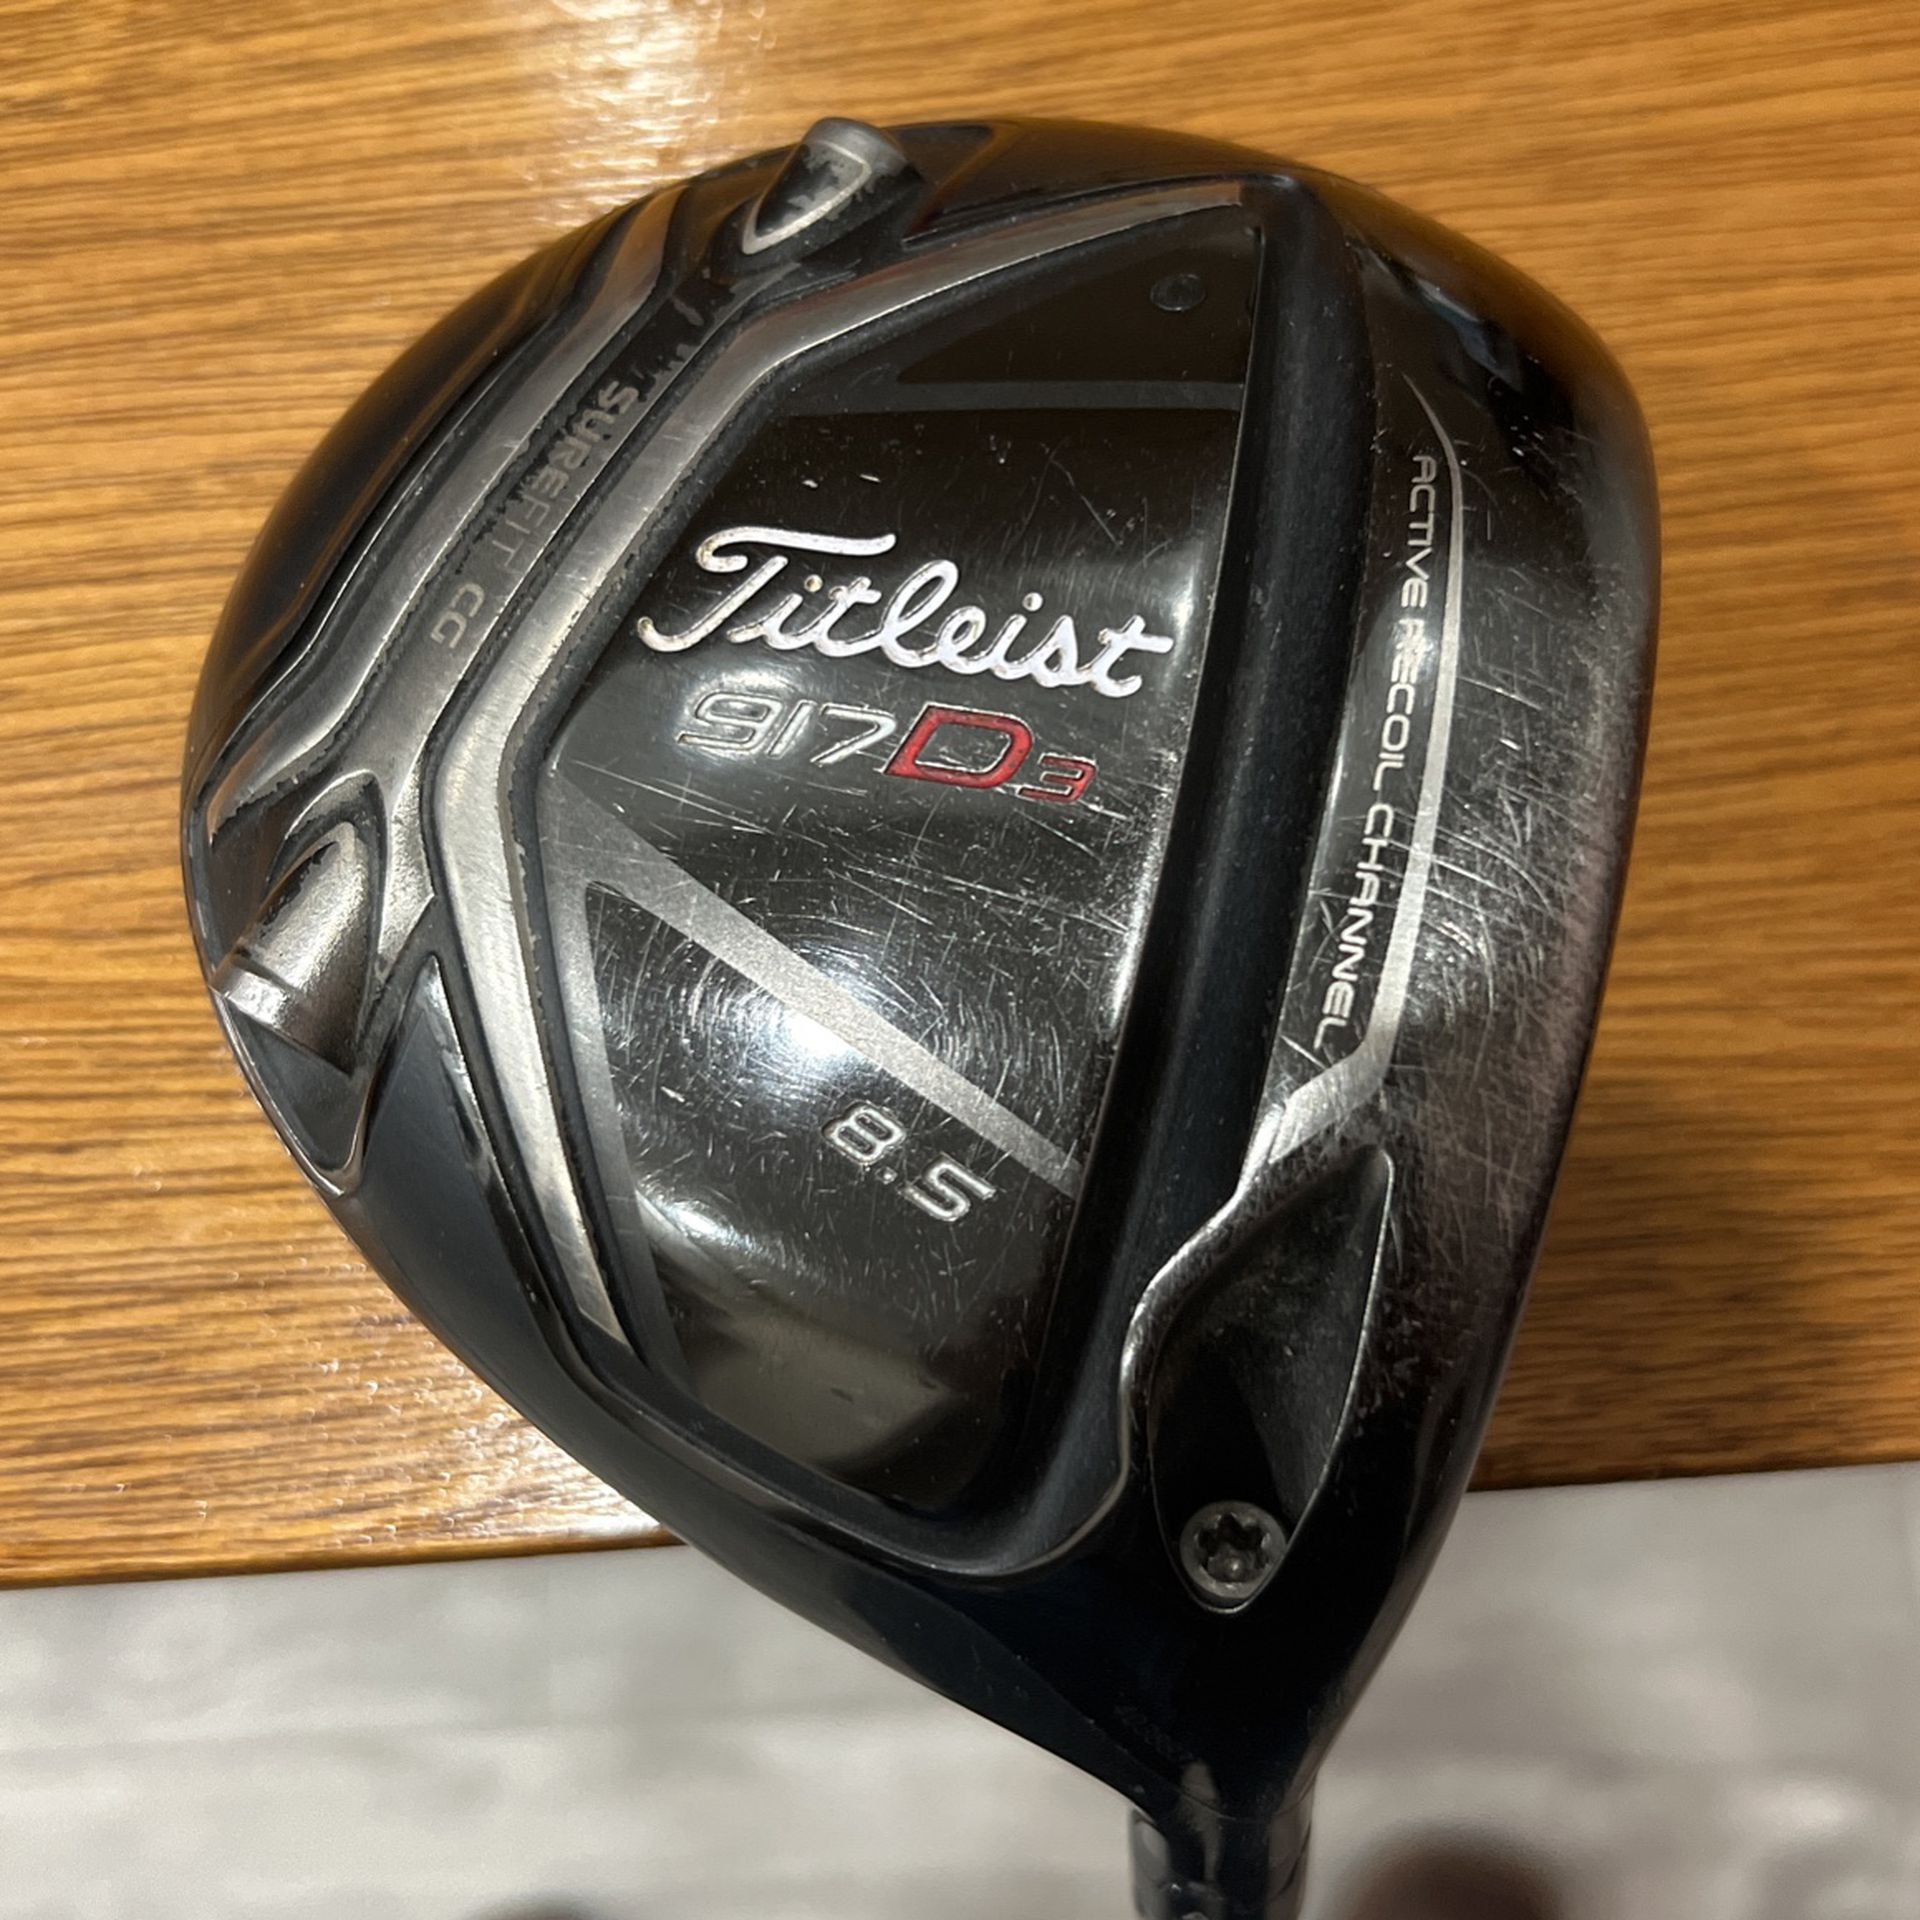 Titleist 917 D3 8.5 Degree for Sale in Albuquerque, NM - OfferUp